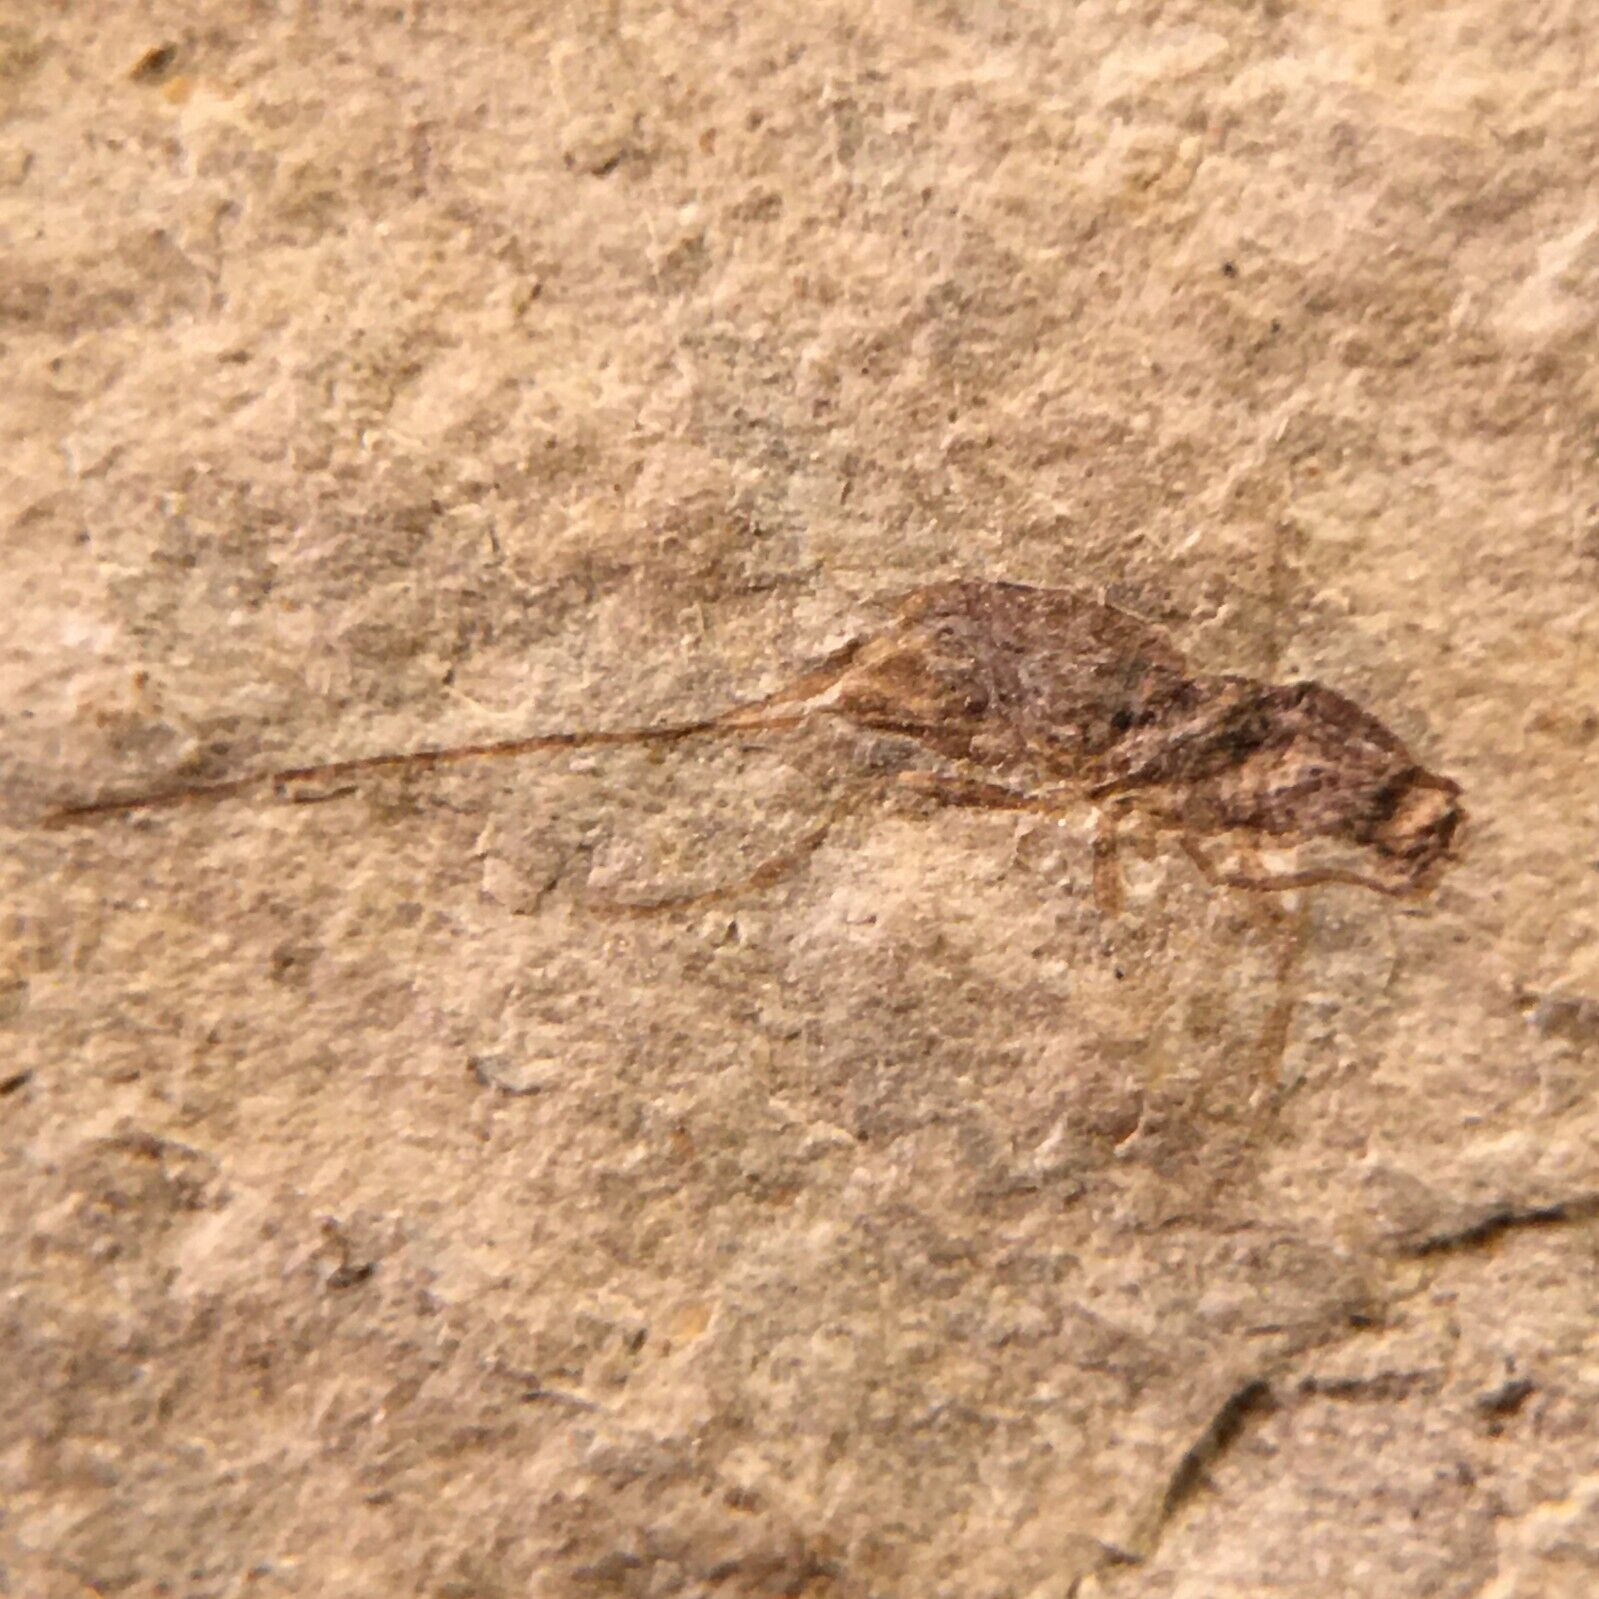 Parasitic Wasp - Insect fossil from the Yixian Formation